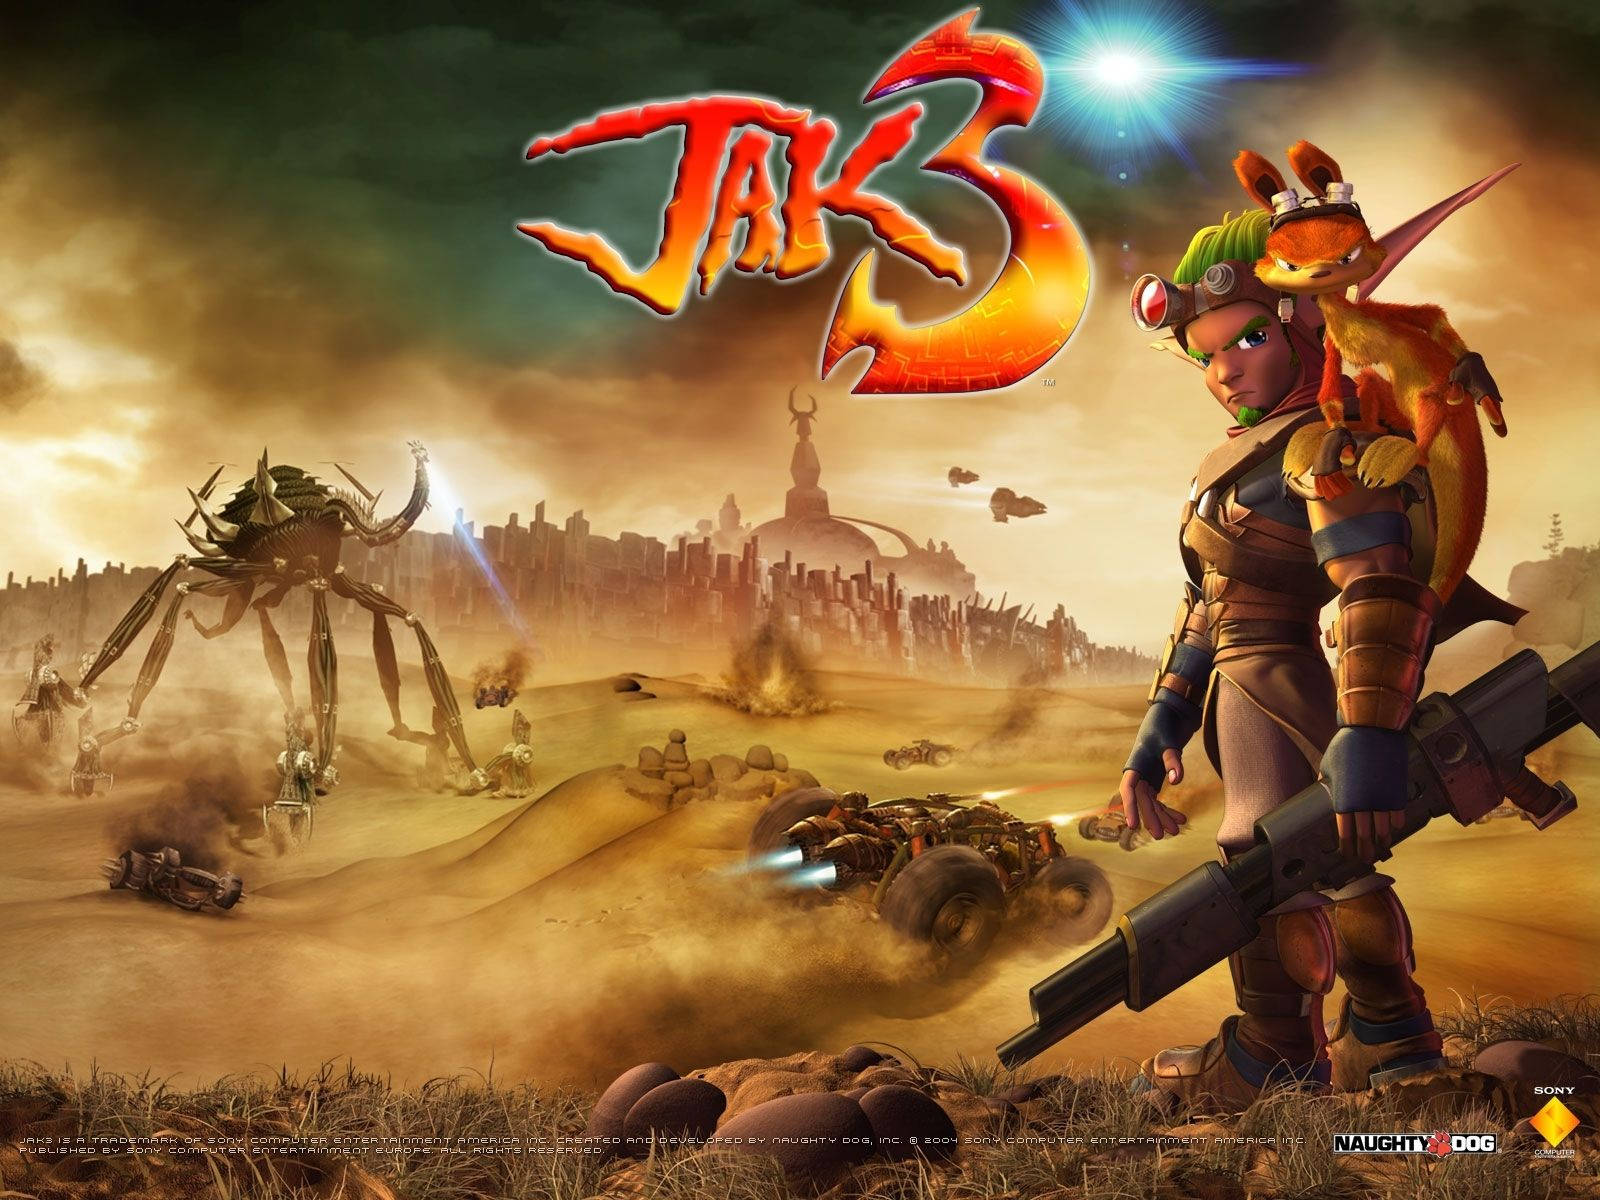 Explore new worlds and unravel ancient mysteries with Jak and Daxter! Wallpaper